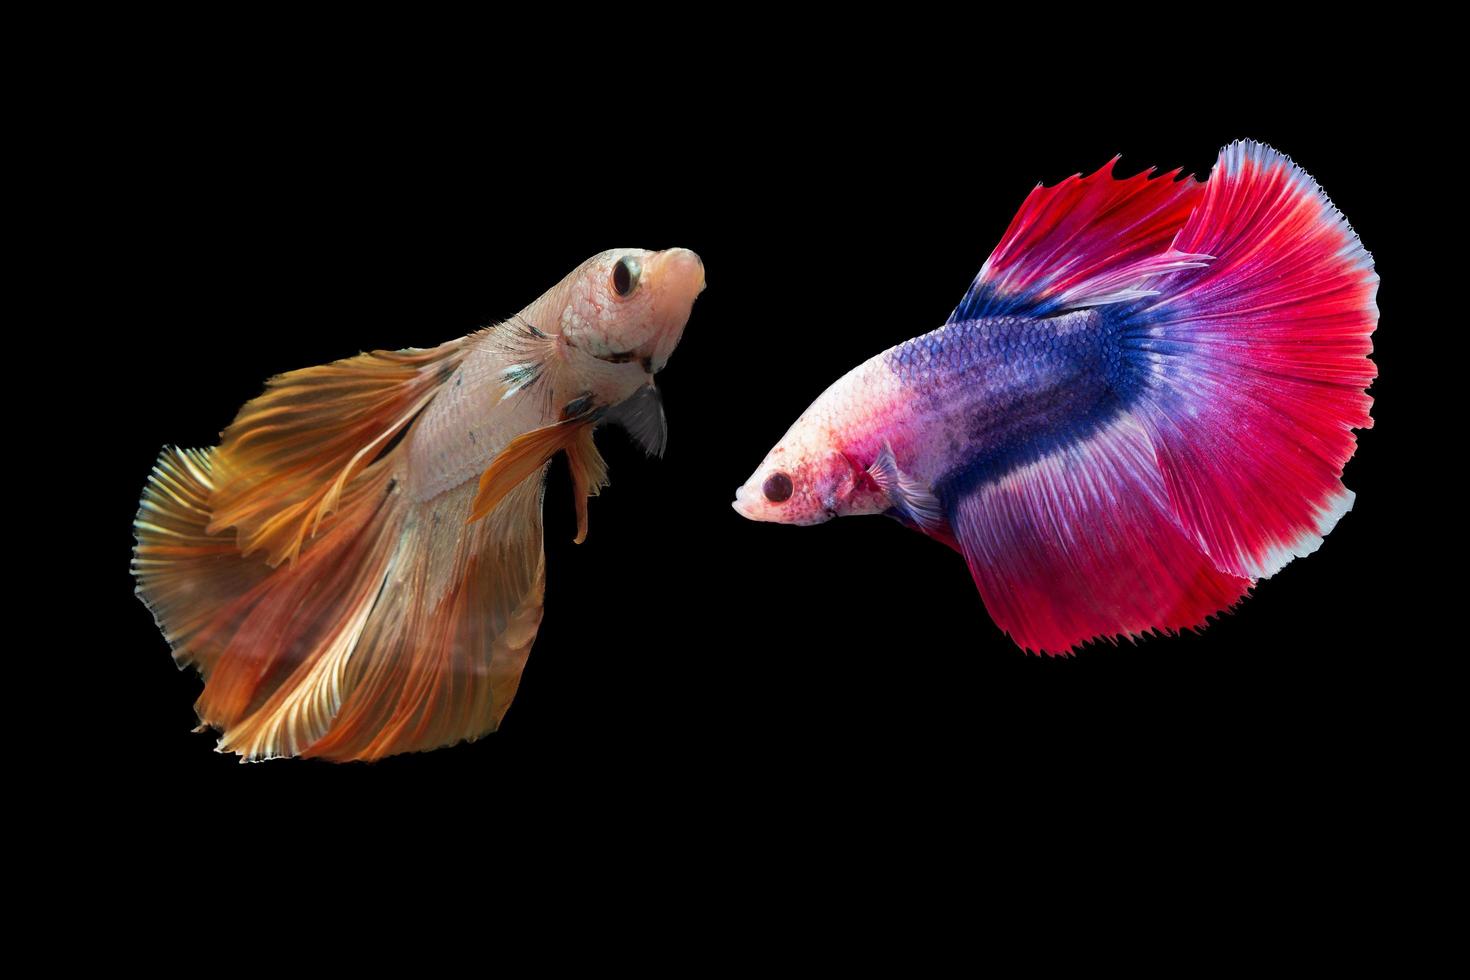 Siam betta fish with beautiful colors on a black background photo